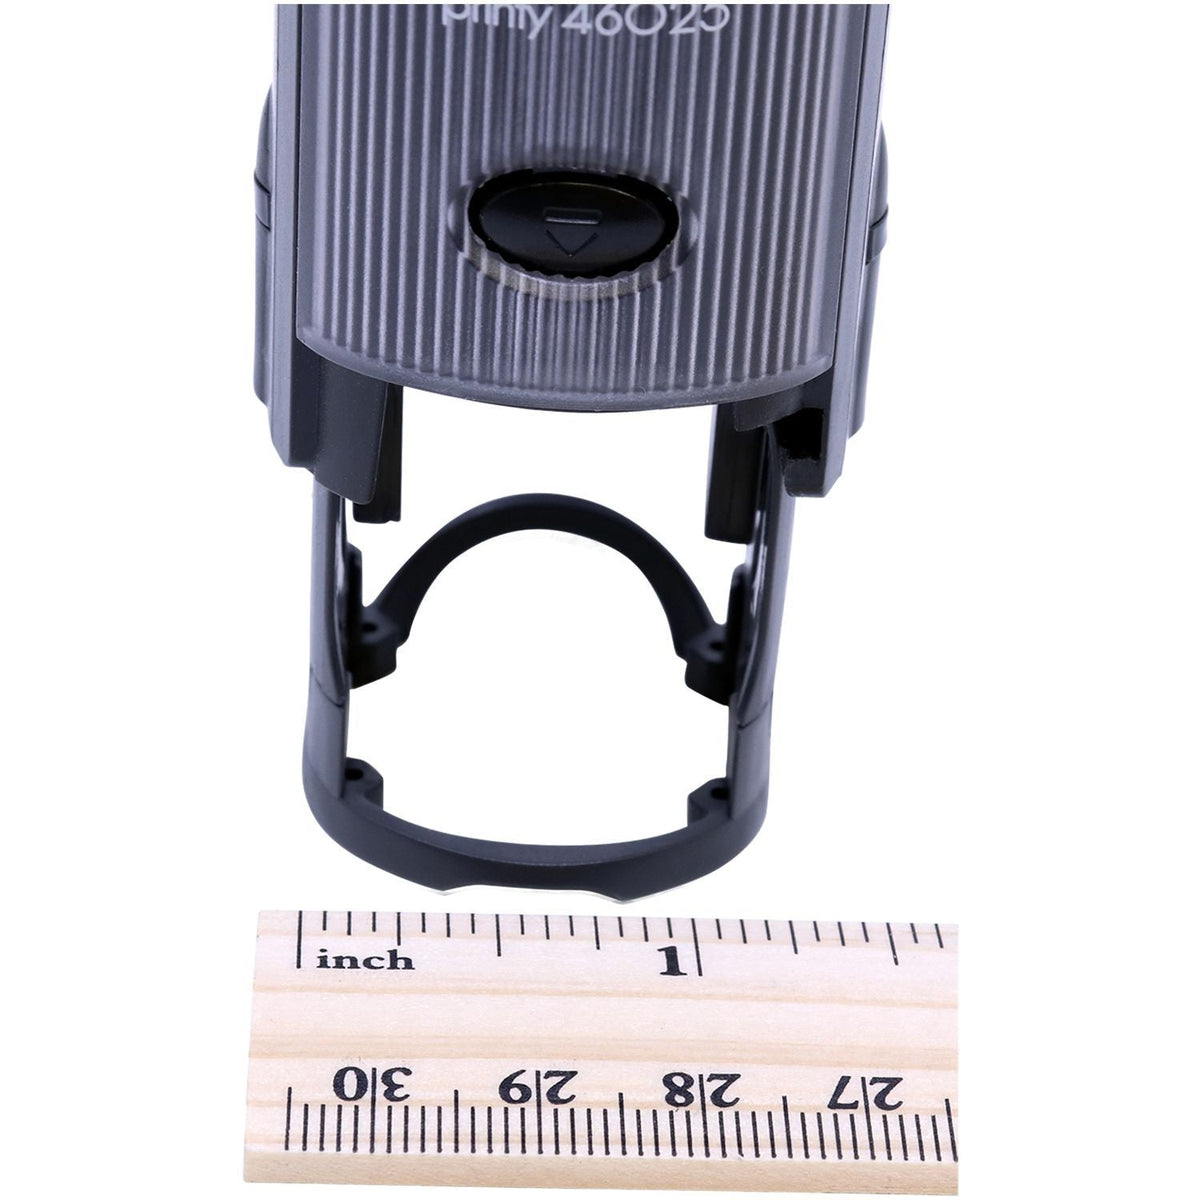 Measurment of Self-Inking Round Surprised Smiley Stamp with Ruler